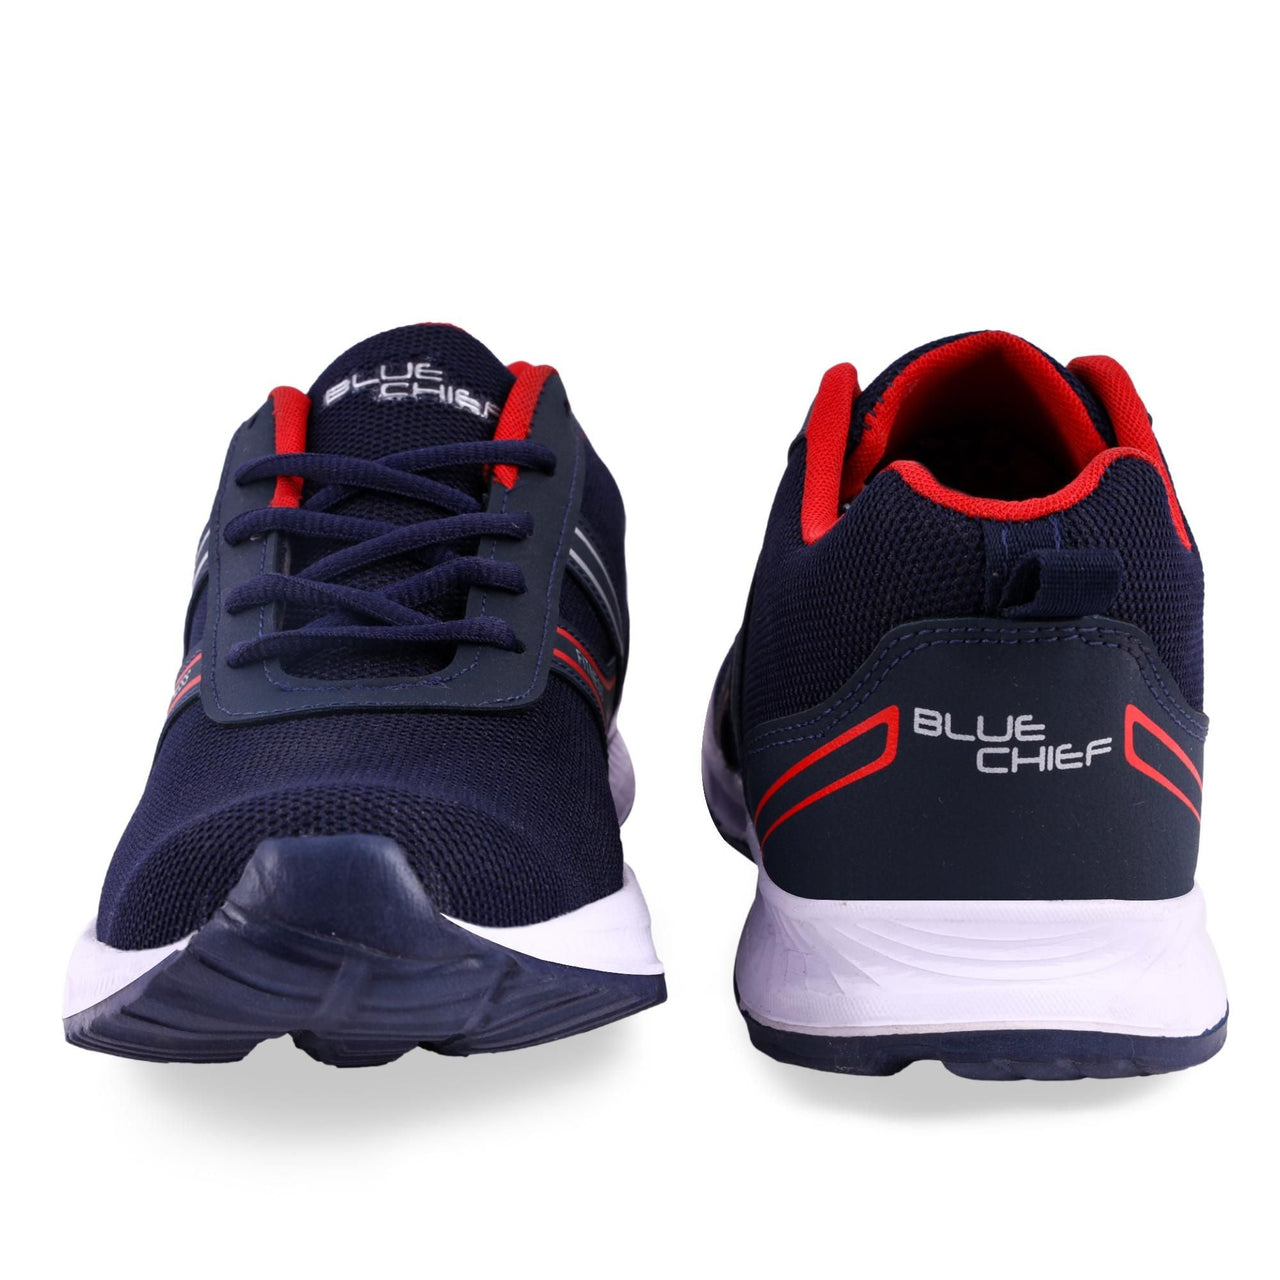 Men's Casual Lace-up Sports Shoes for Running and Walking